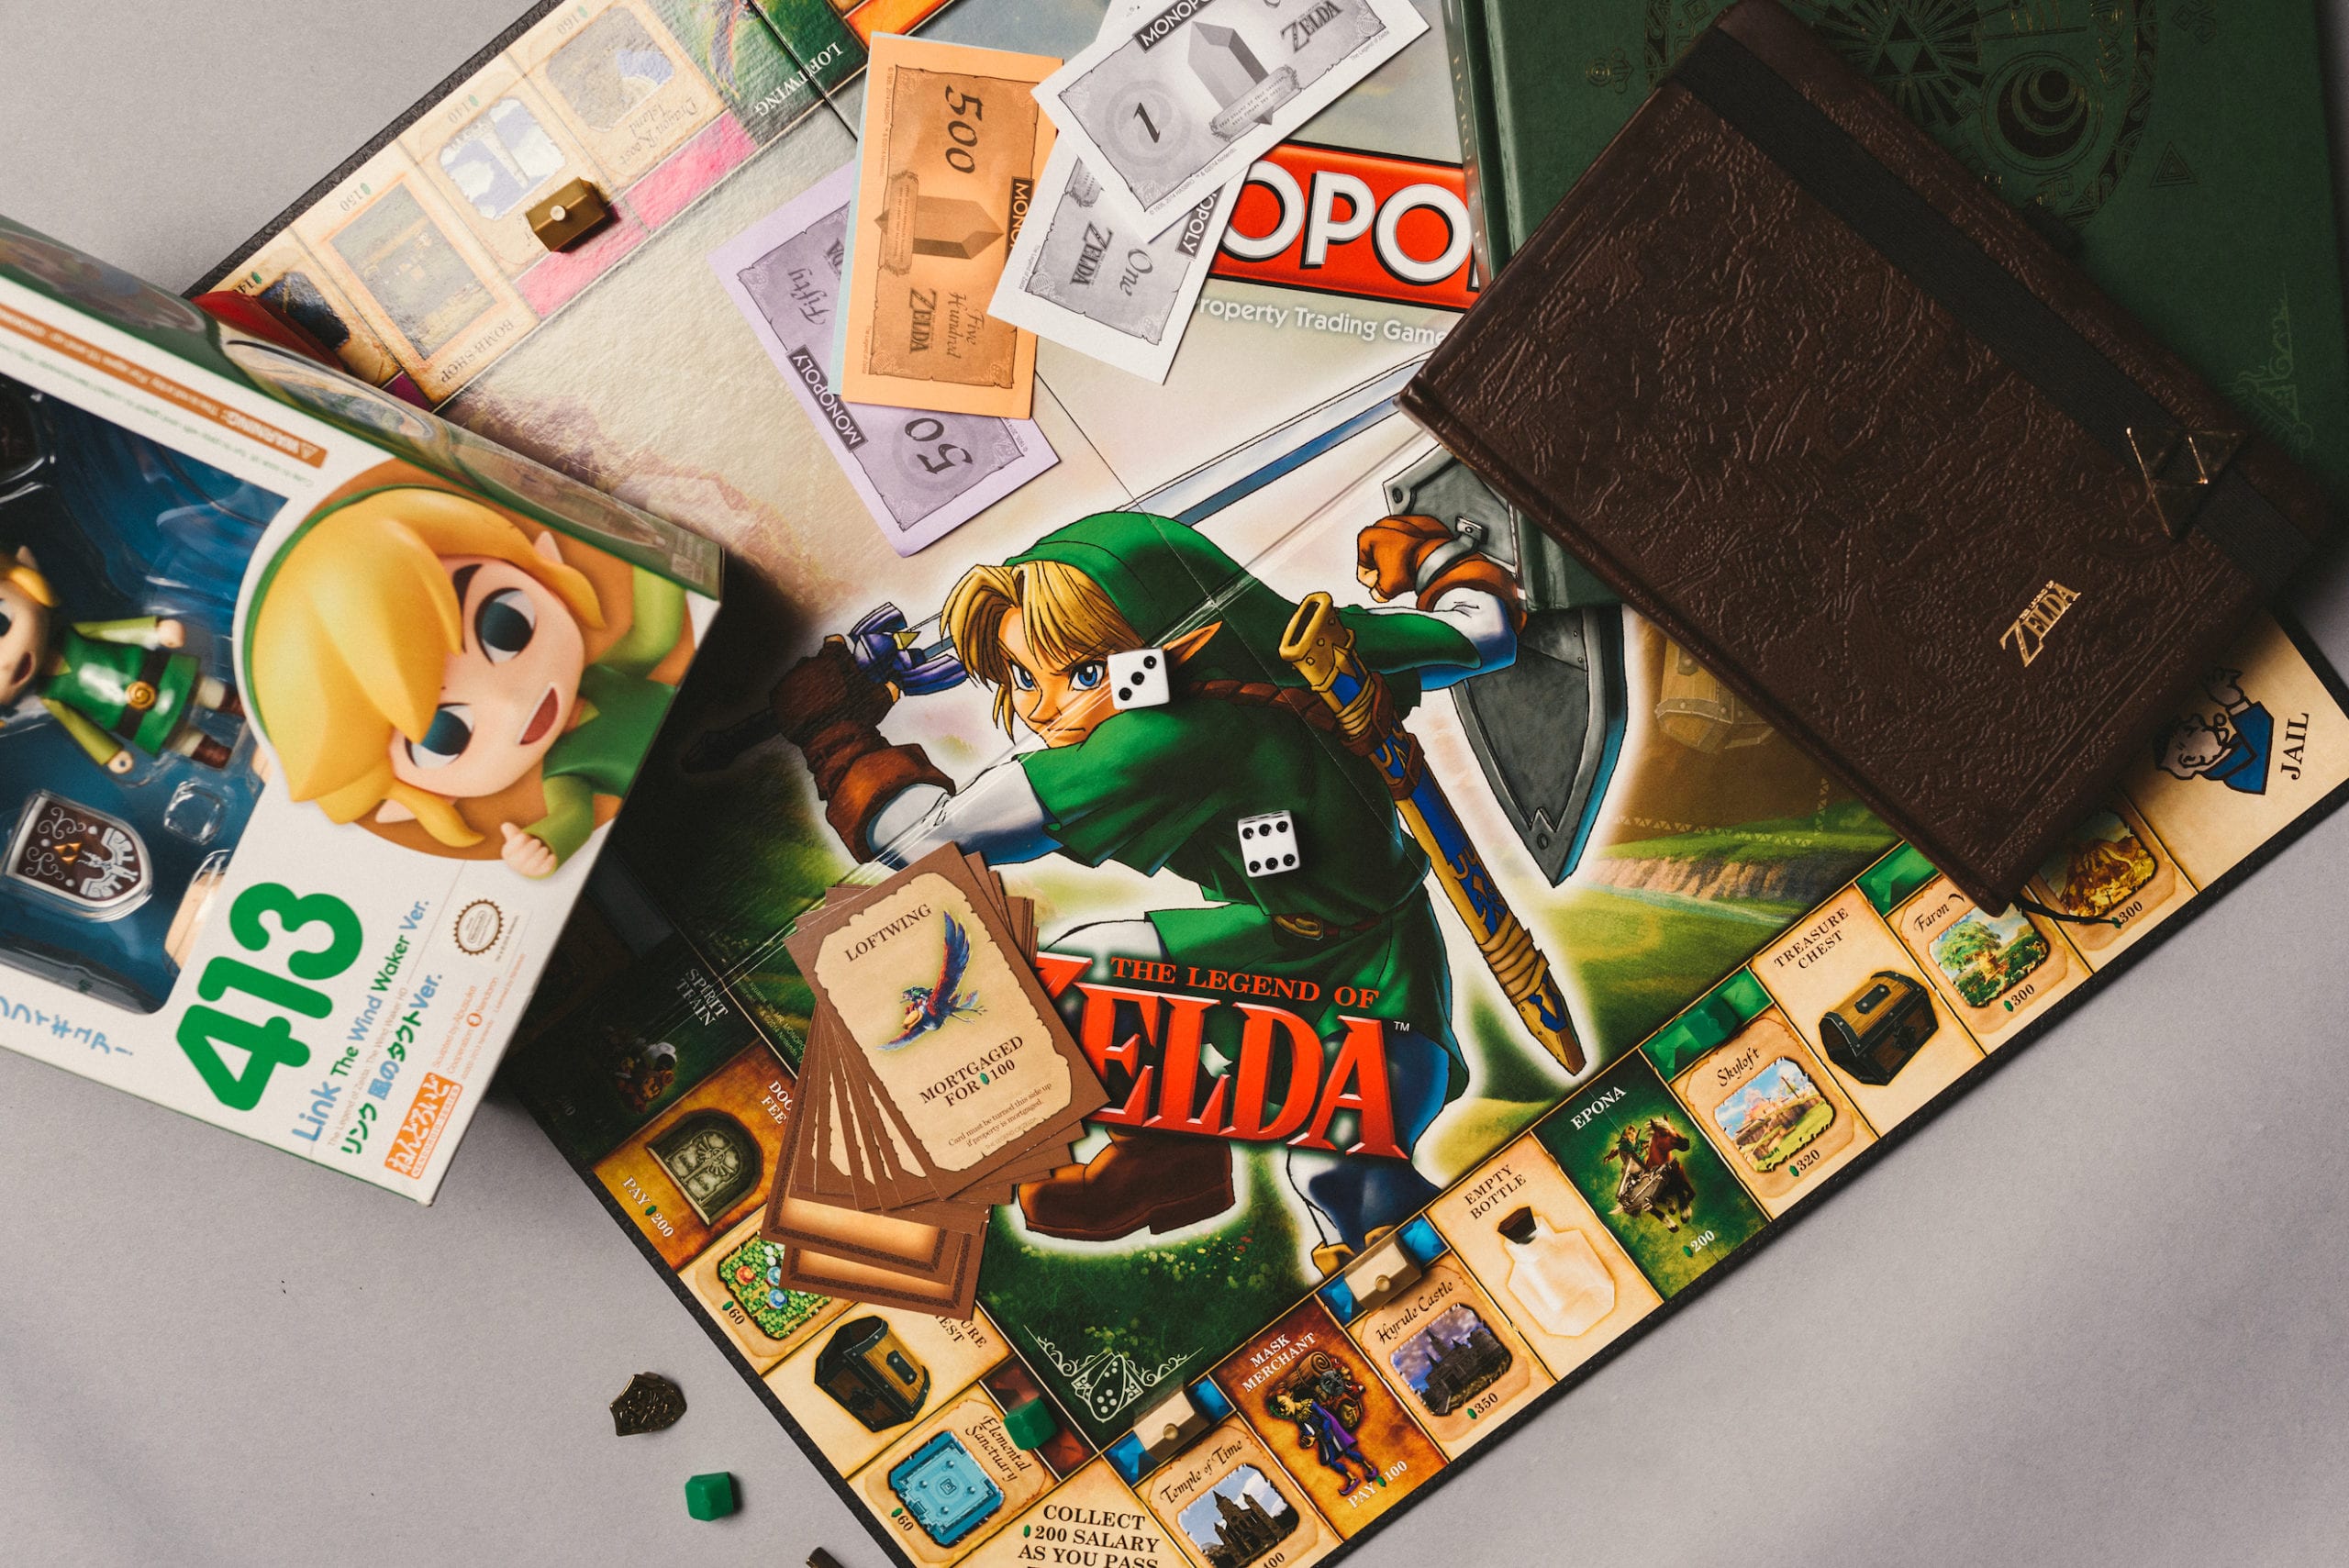 Heart Piece Media Day Zelda and Monopoly board games on display with Zelda book